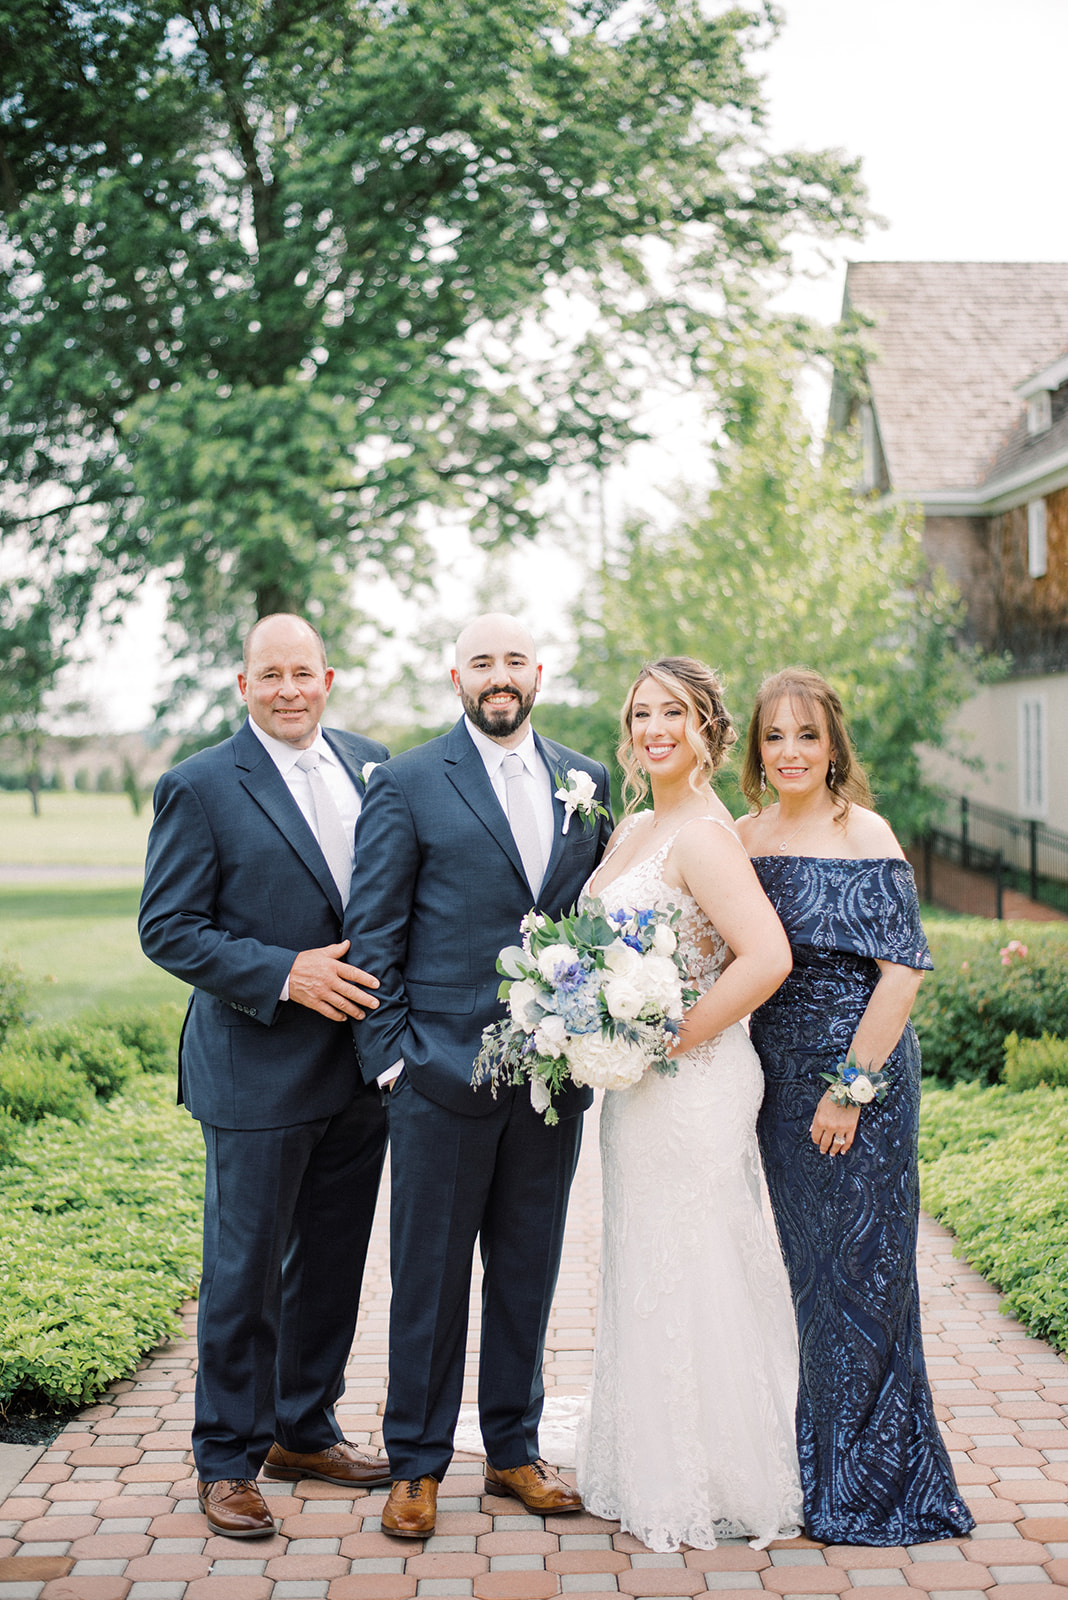 Family Formals at the Coach House at the Ryland Inn captured by New Jersey Wedding Photographer, Michelle Behre!